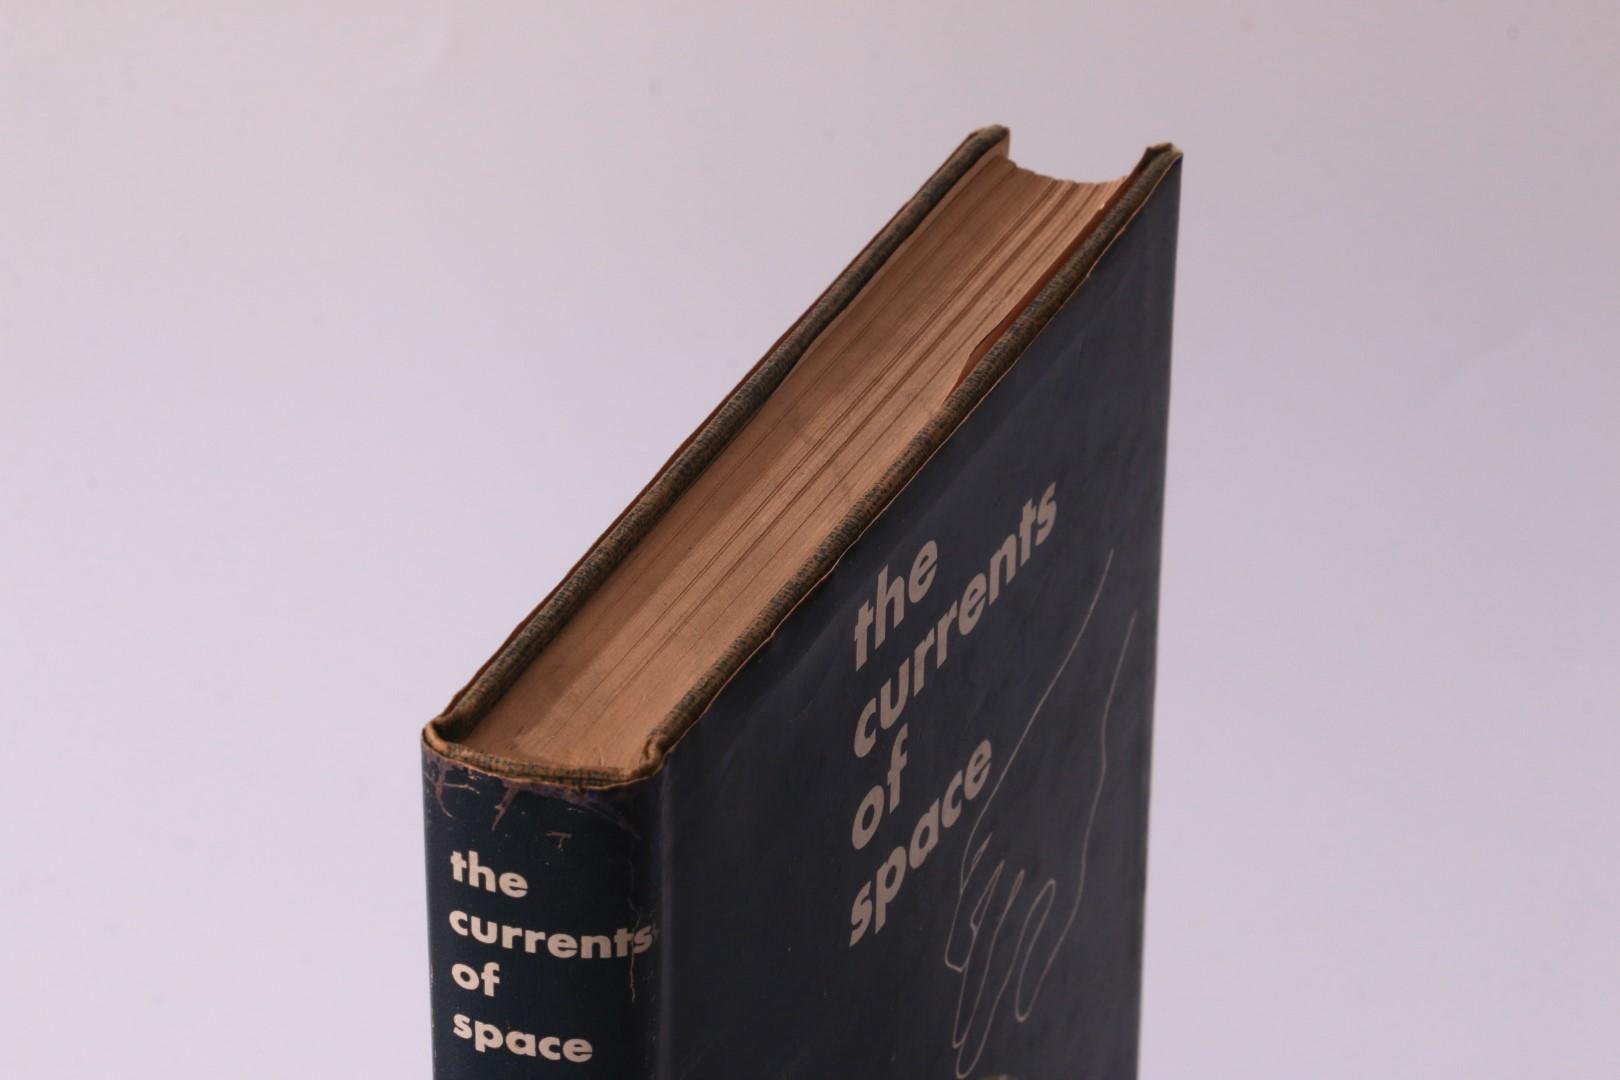 Isaac Asimov - The Currents of Space - Doubleday, 1952, First Edition.